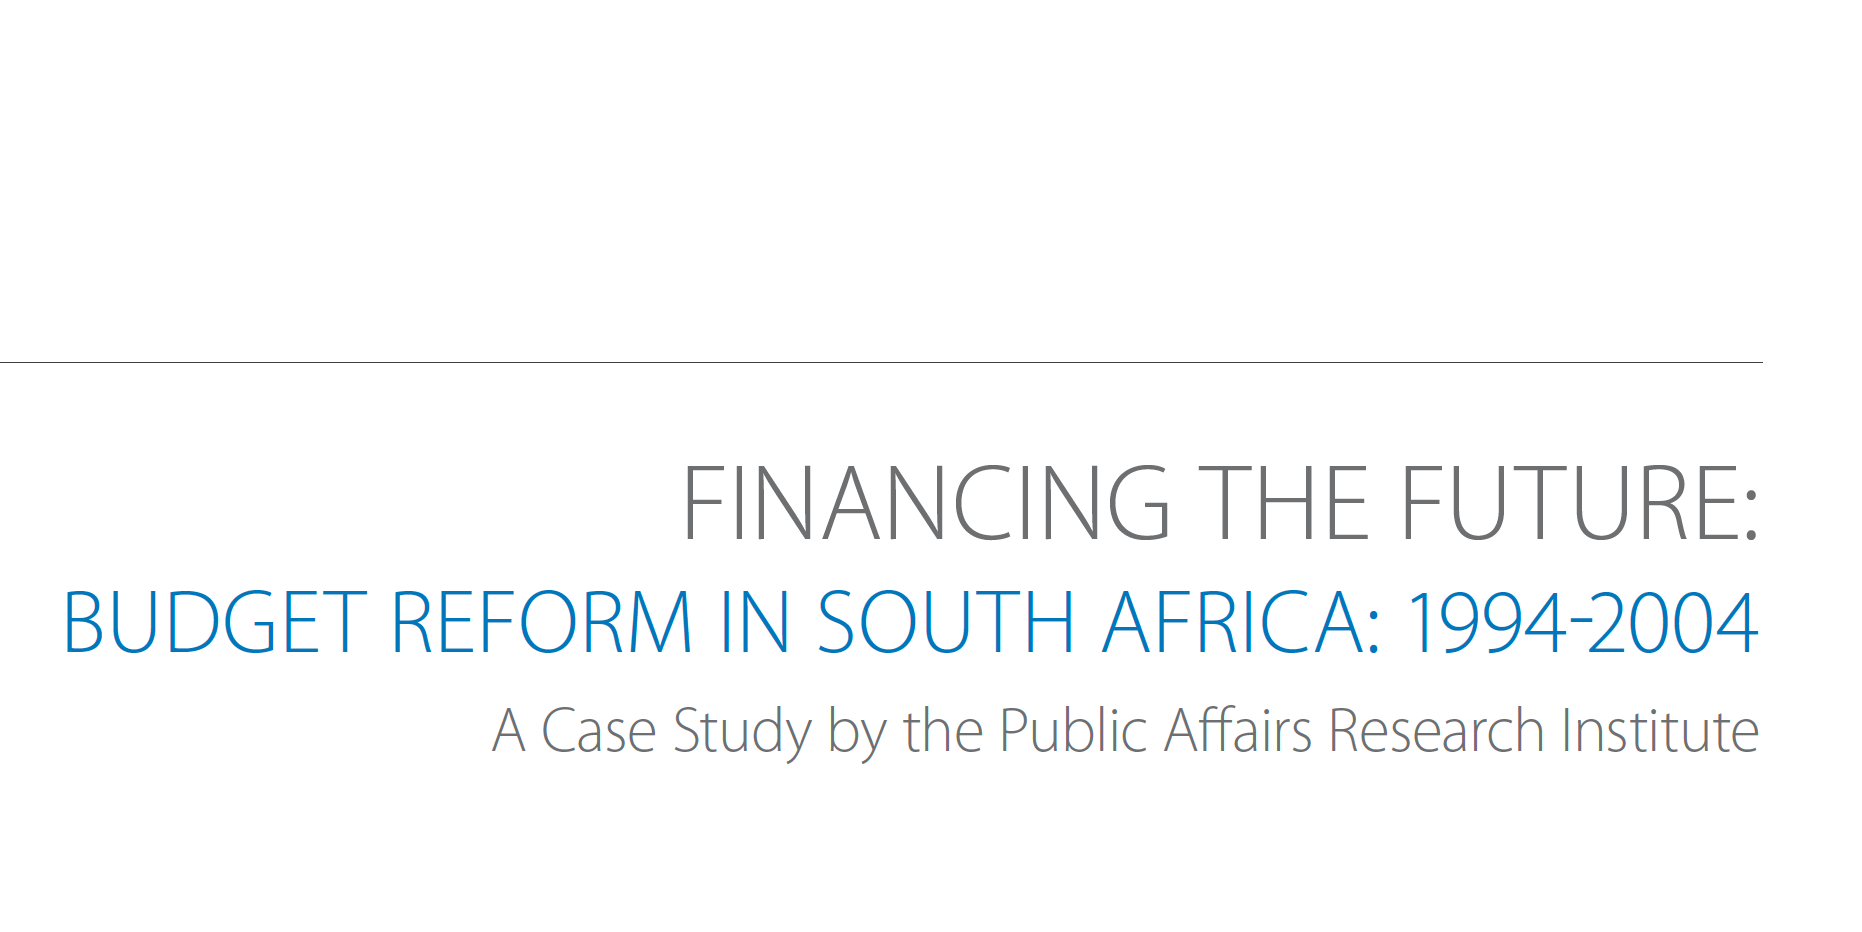 Financing the Future: Budget Reform in SA 1994-2004